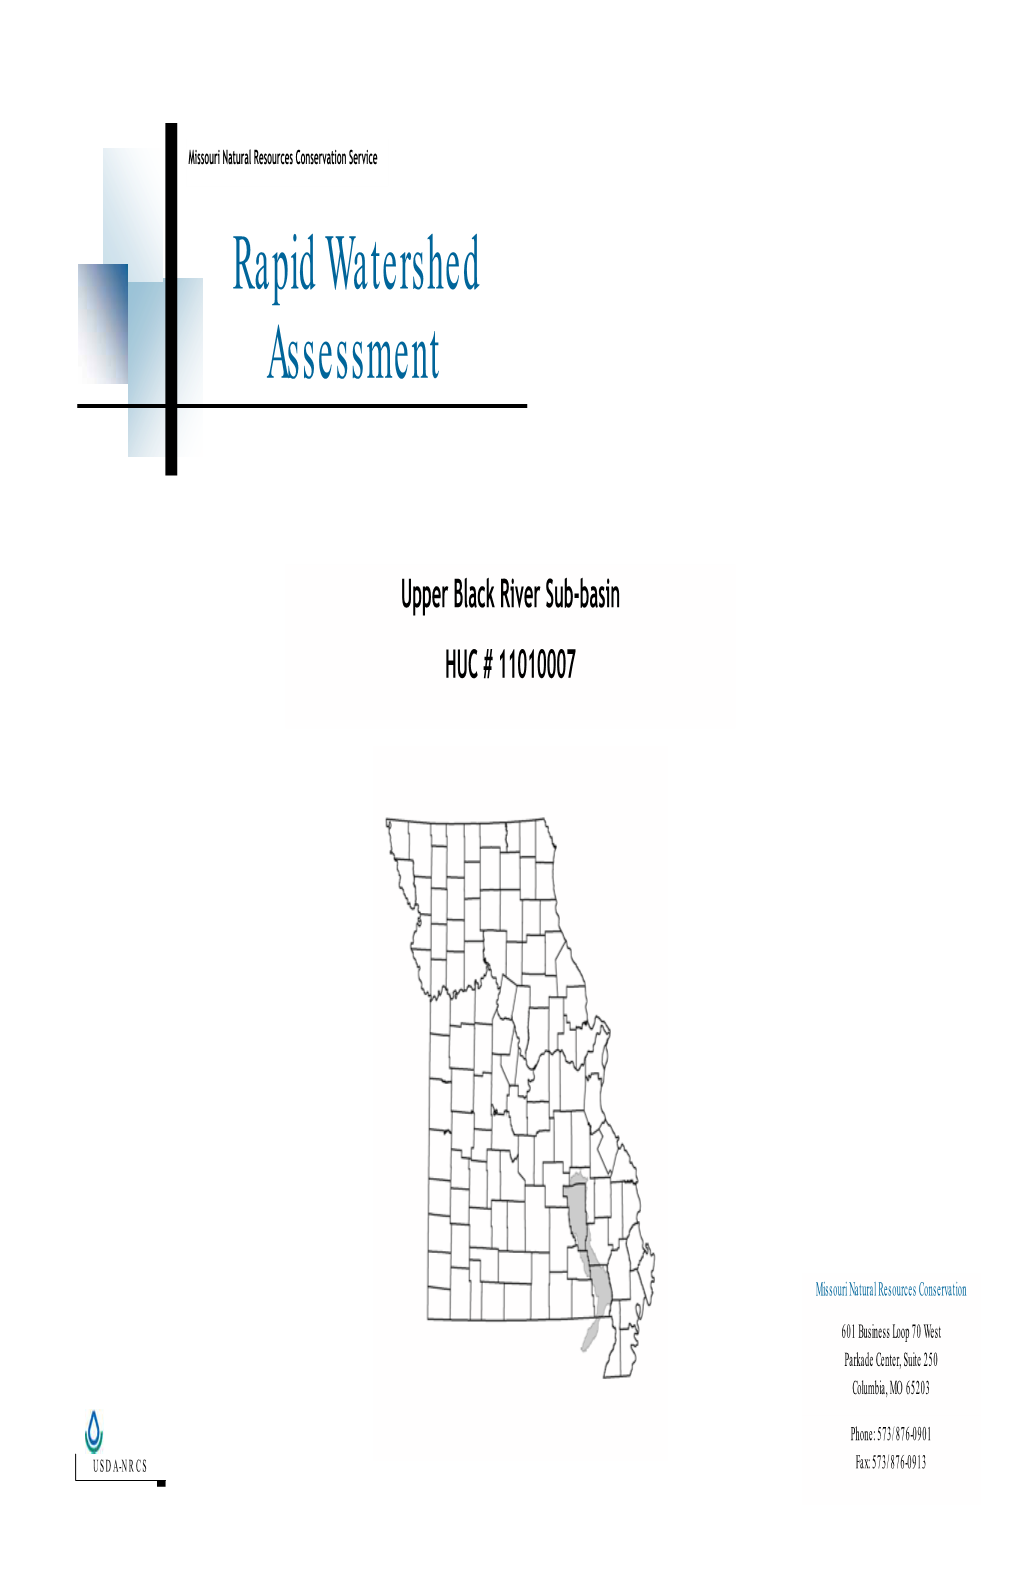 Rapid Watershed Assessment